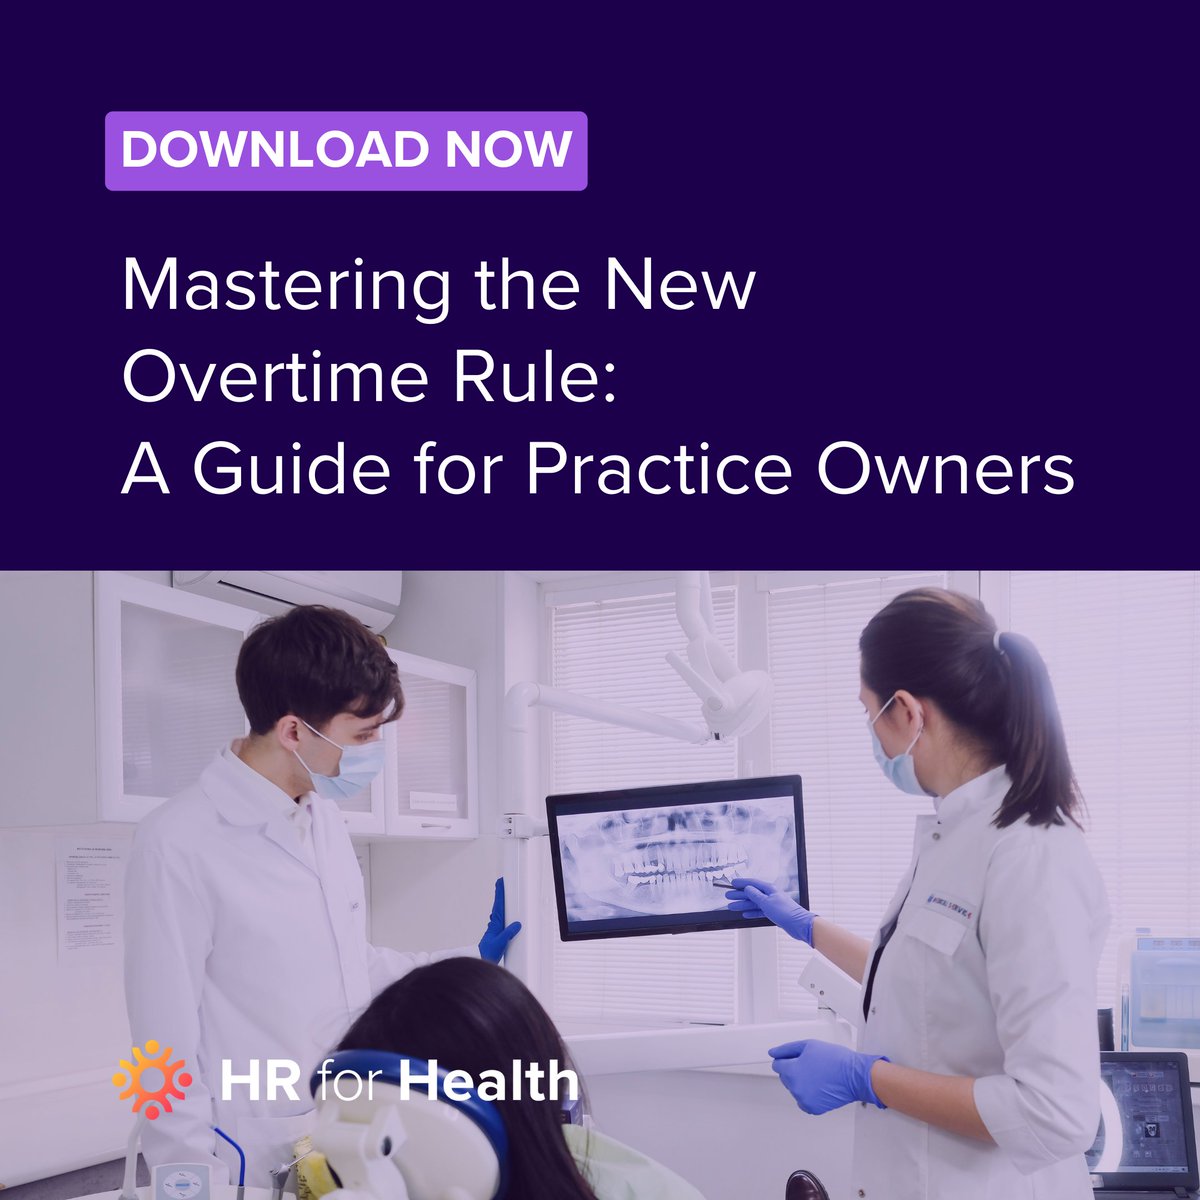 🌟Attention healthcare and dental practice owners! Stay ahead of the game with our FREE guide on mastering the new overtime rule. Download now: bit.ly/4dzJcdj 📋💼 #healthcare #dentalpractice #overtimerule #compliance #HRsoftware